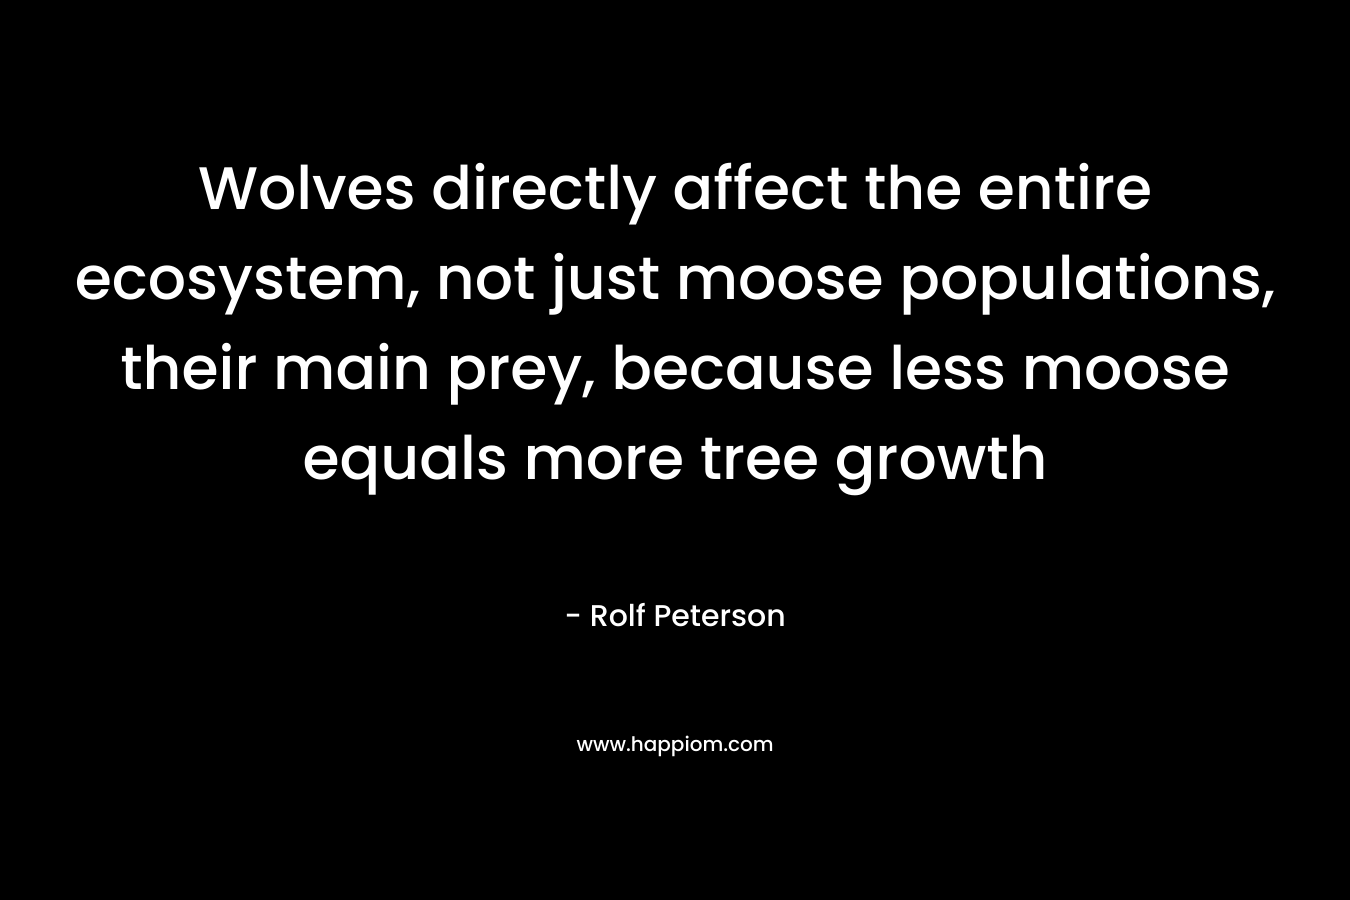 Wolves directly affect the entire ecosystem, not just moose populations, their main prey, because less moose equals more tree growth